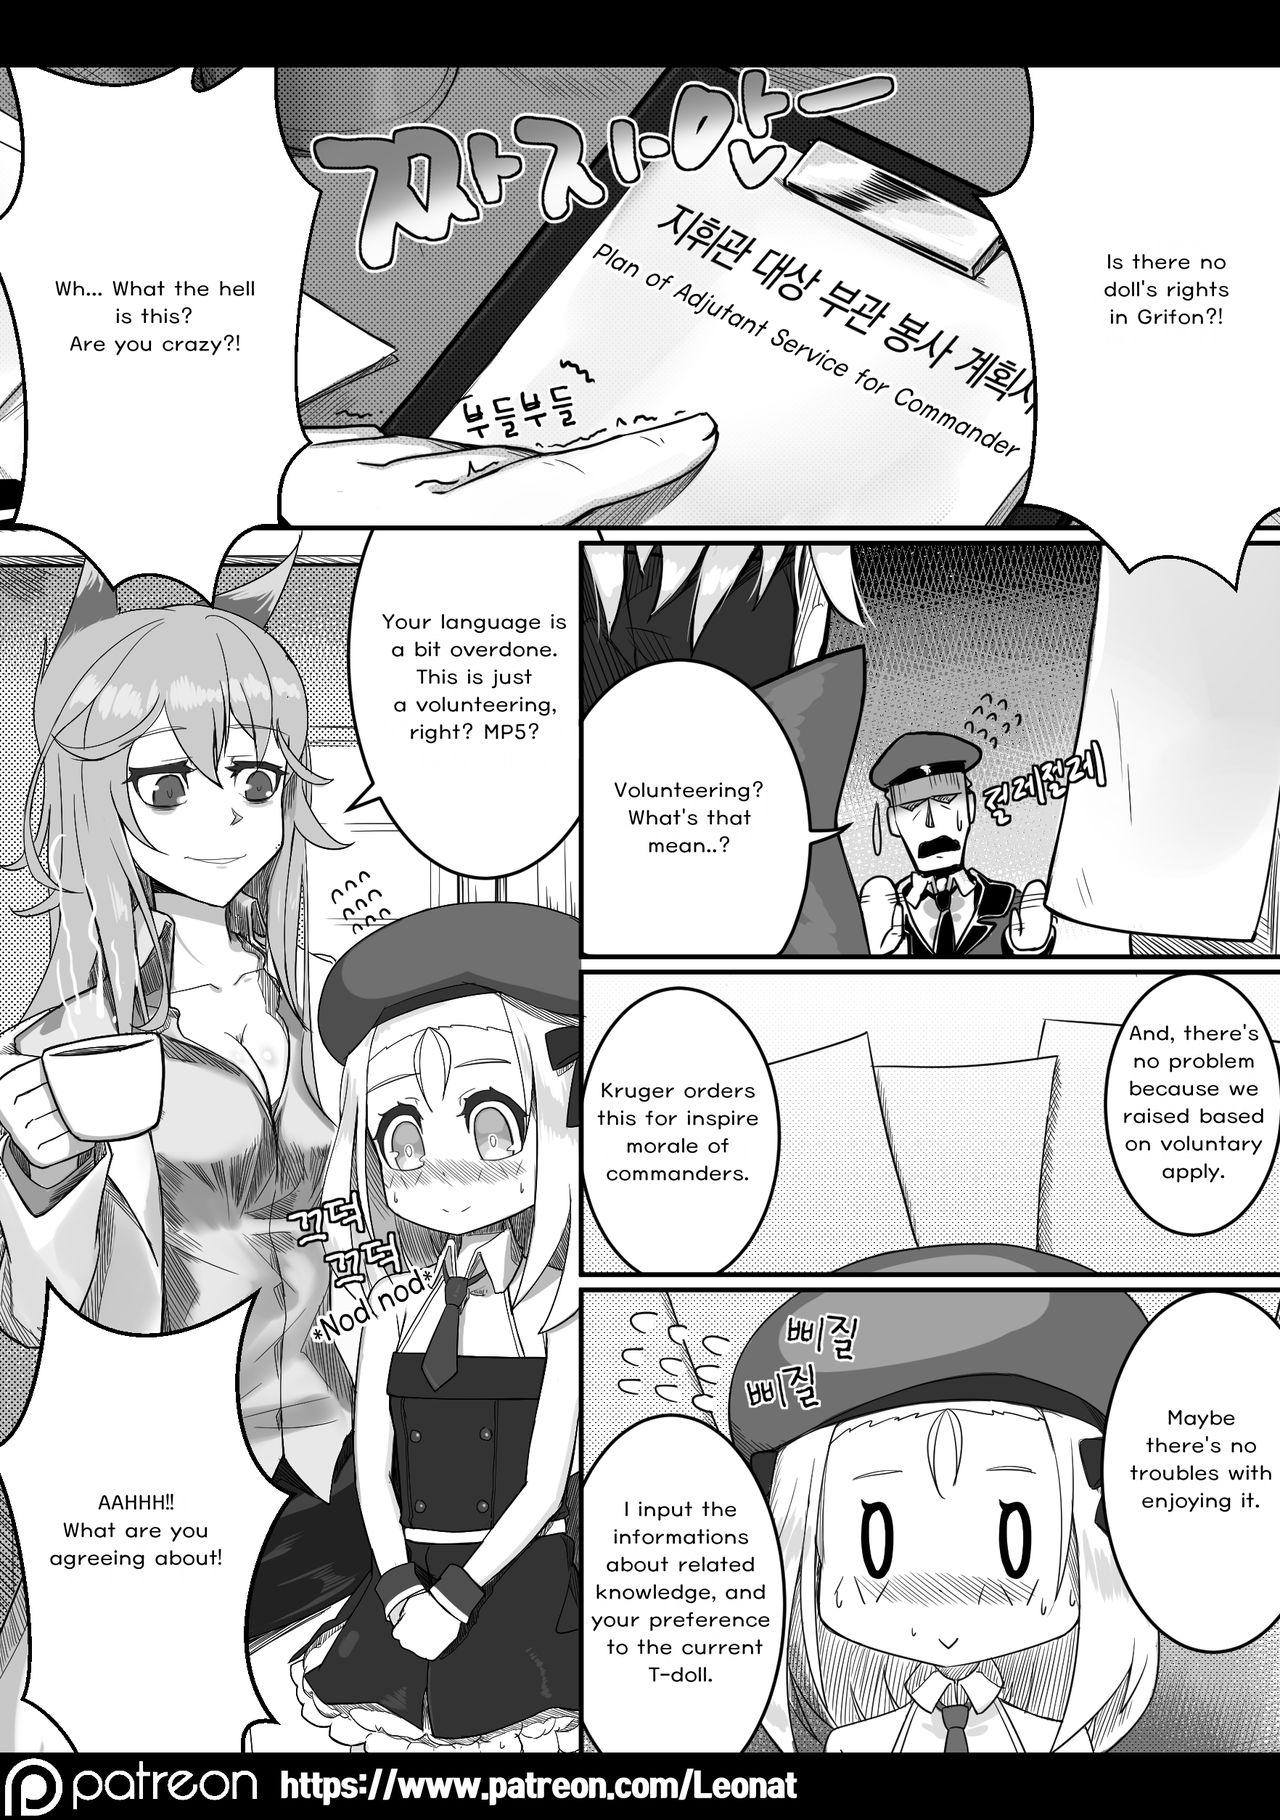 Old Vs Young Lounge of HQ vol.2 - Girls frontline Pussylick - Page 6